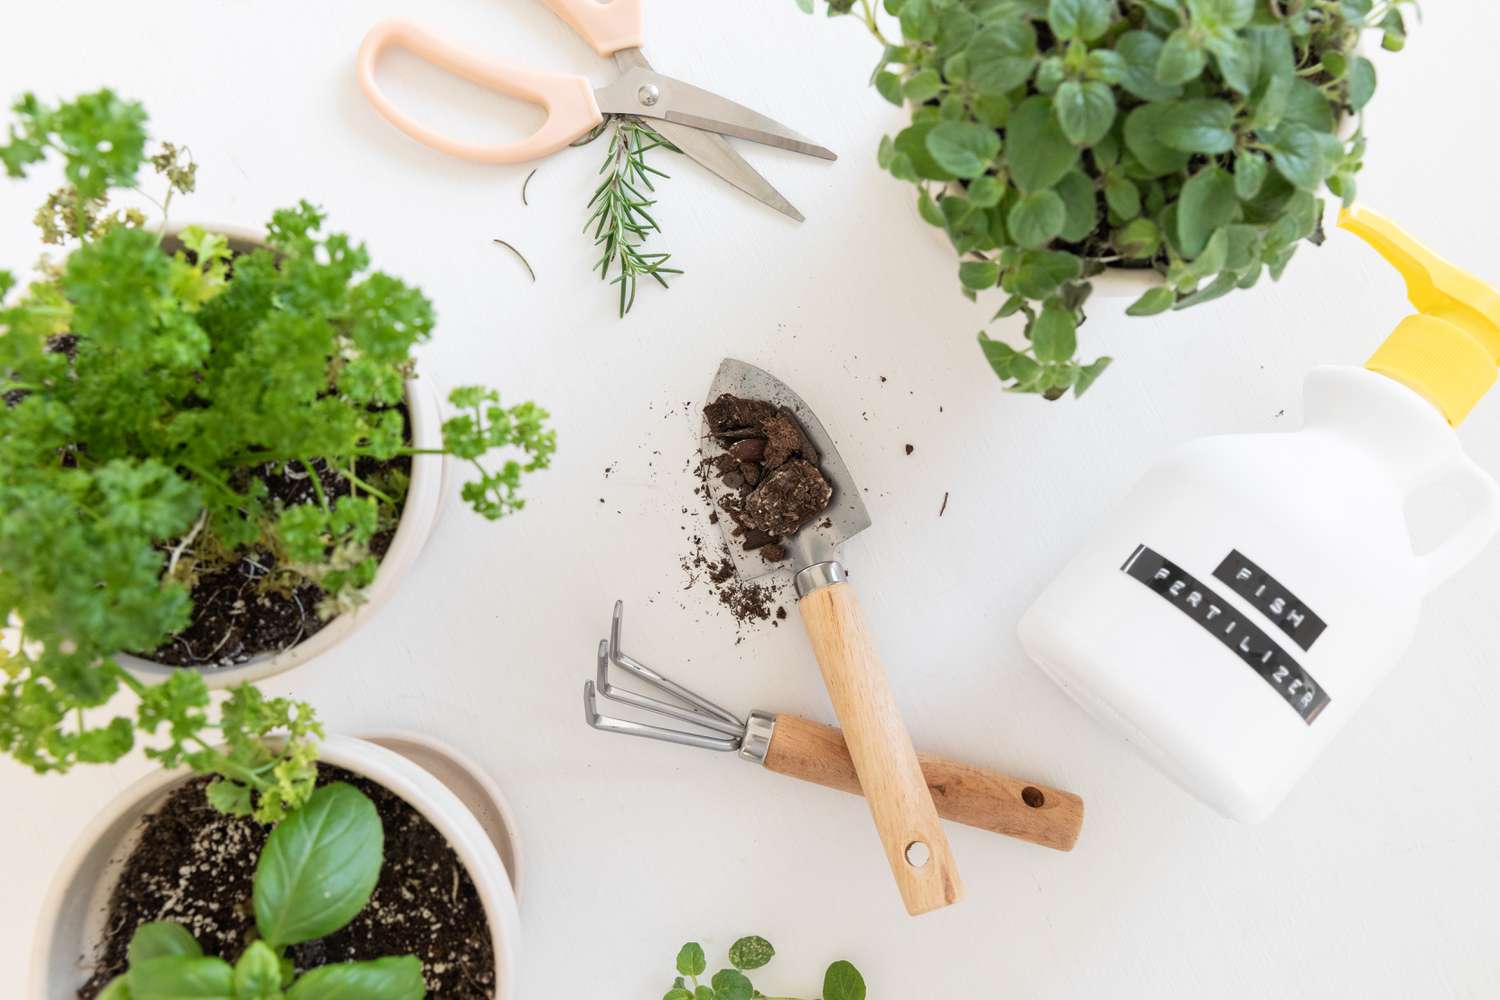 How To Fertilize Herbs